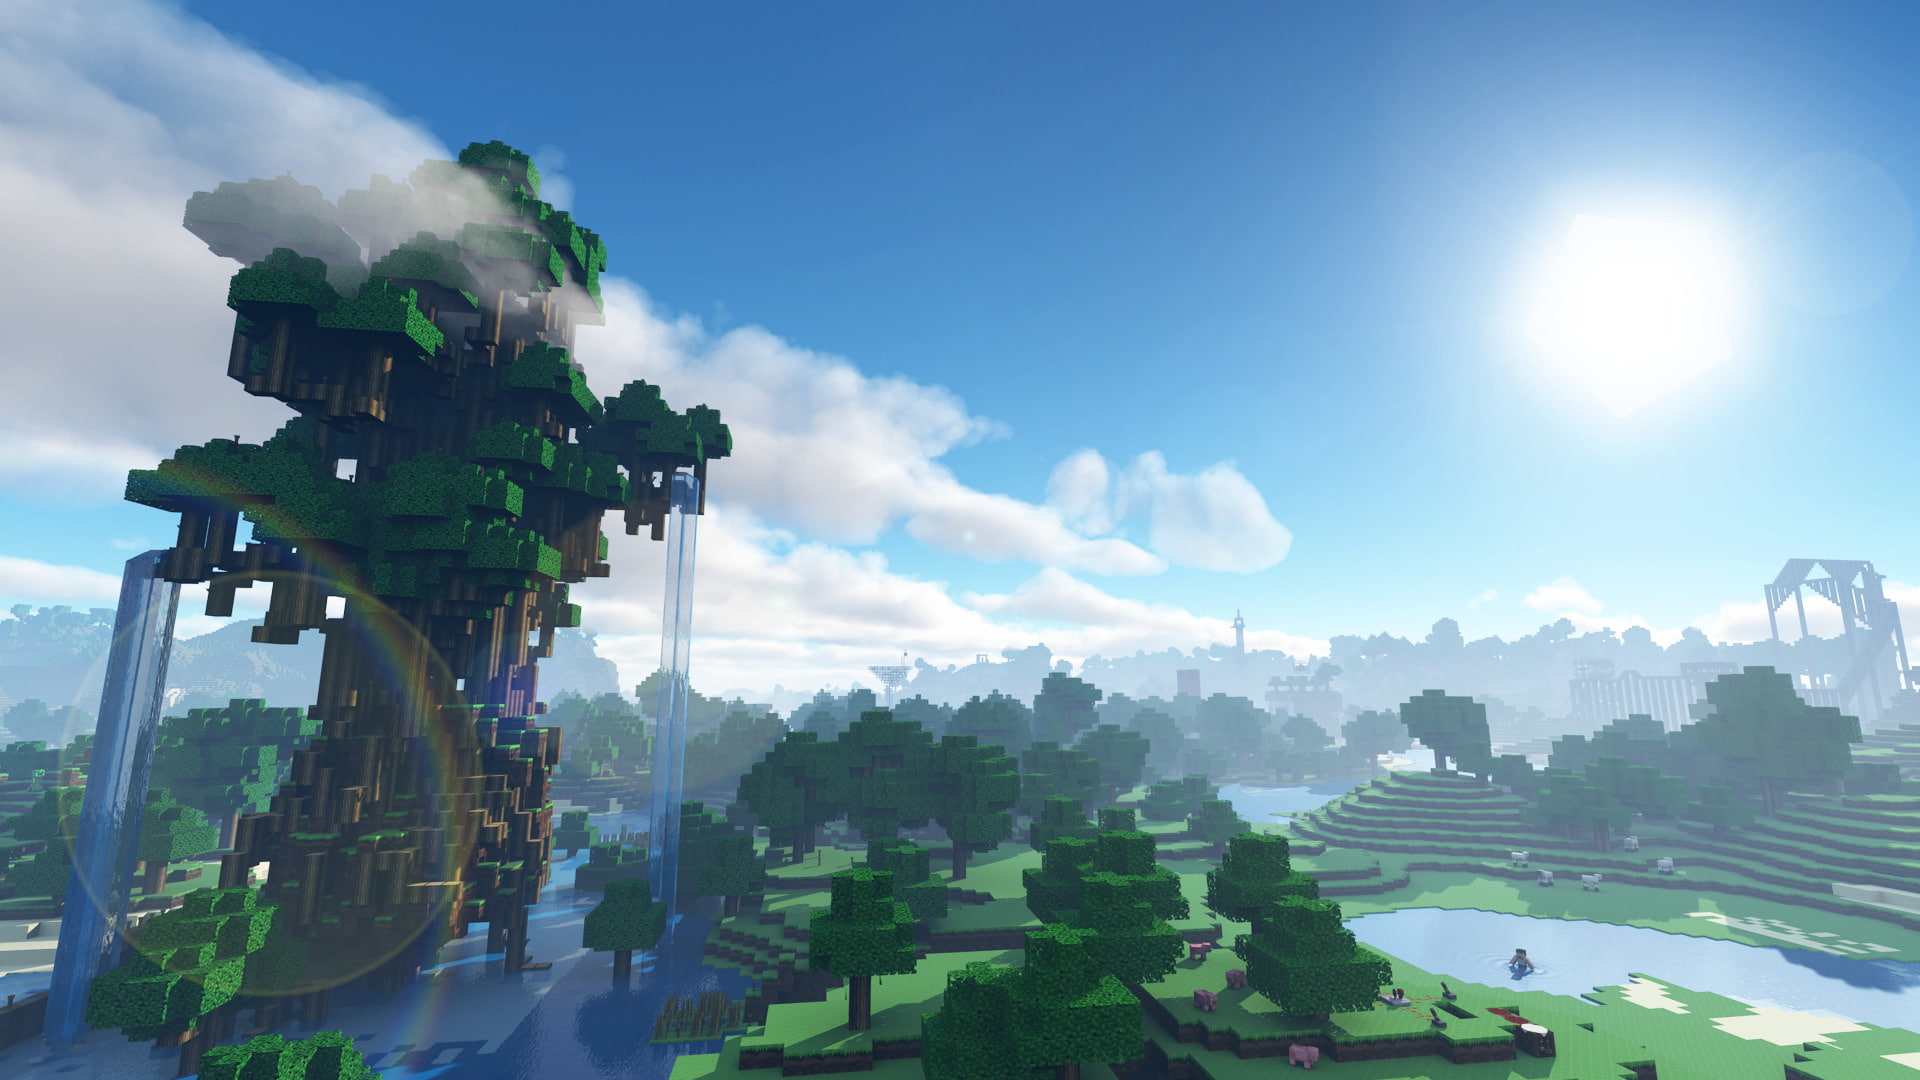 minecraft waterfall, sky, architecture, building exterior, built structure